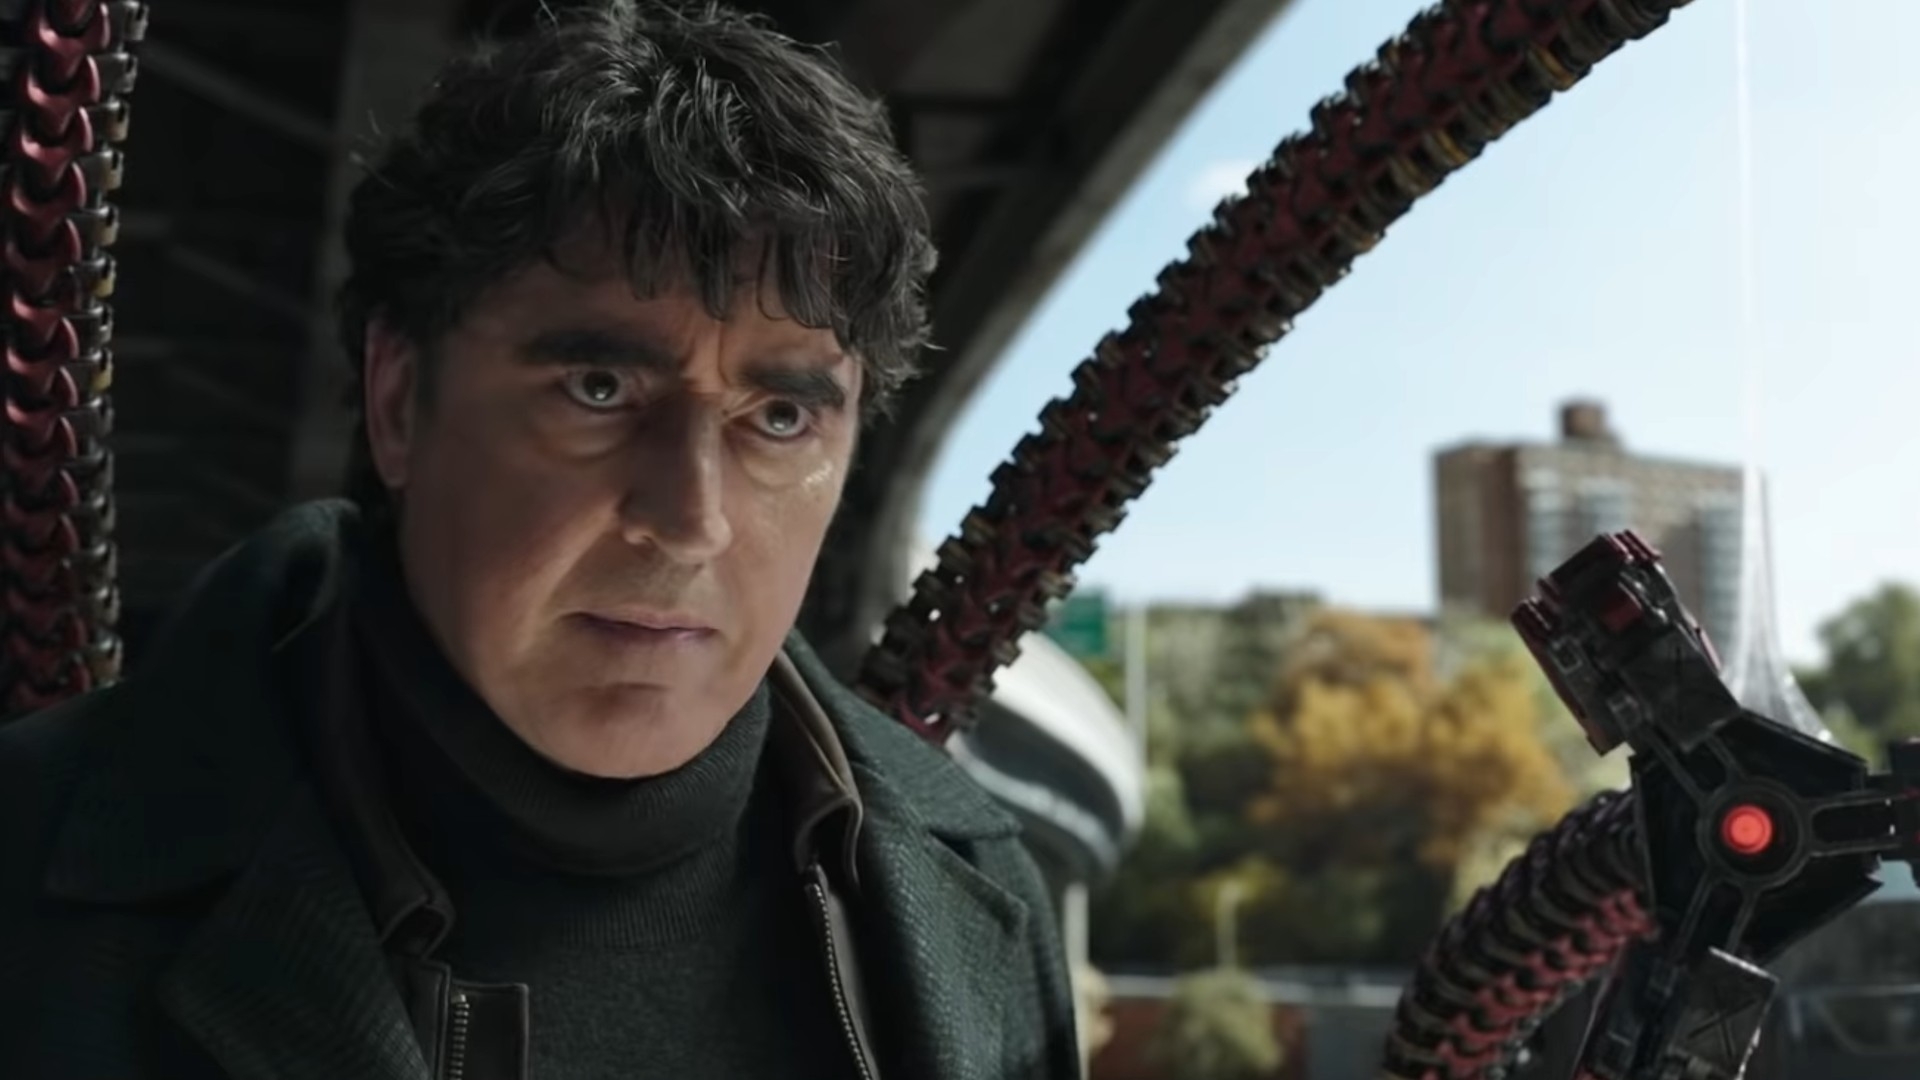 Binge Society - The Greatest Movie Scenes - Spider-Man's Dr. Octopus actor,  Alfred Molina is turning 69 today!